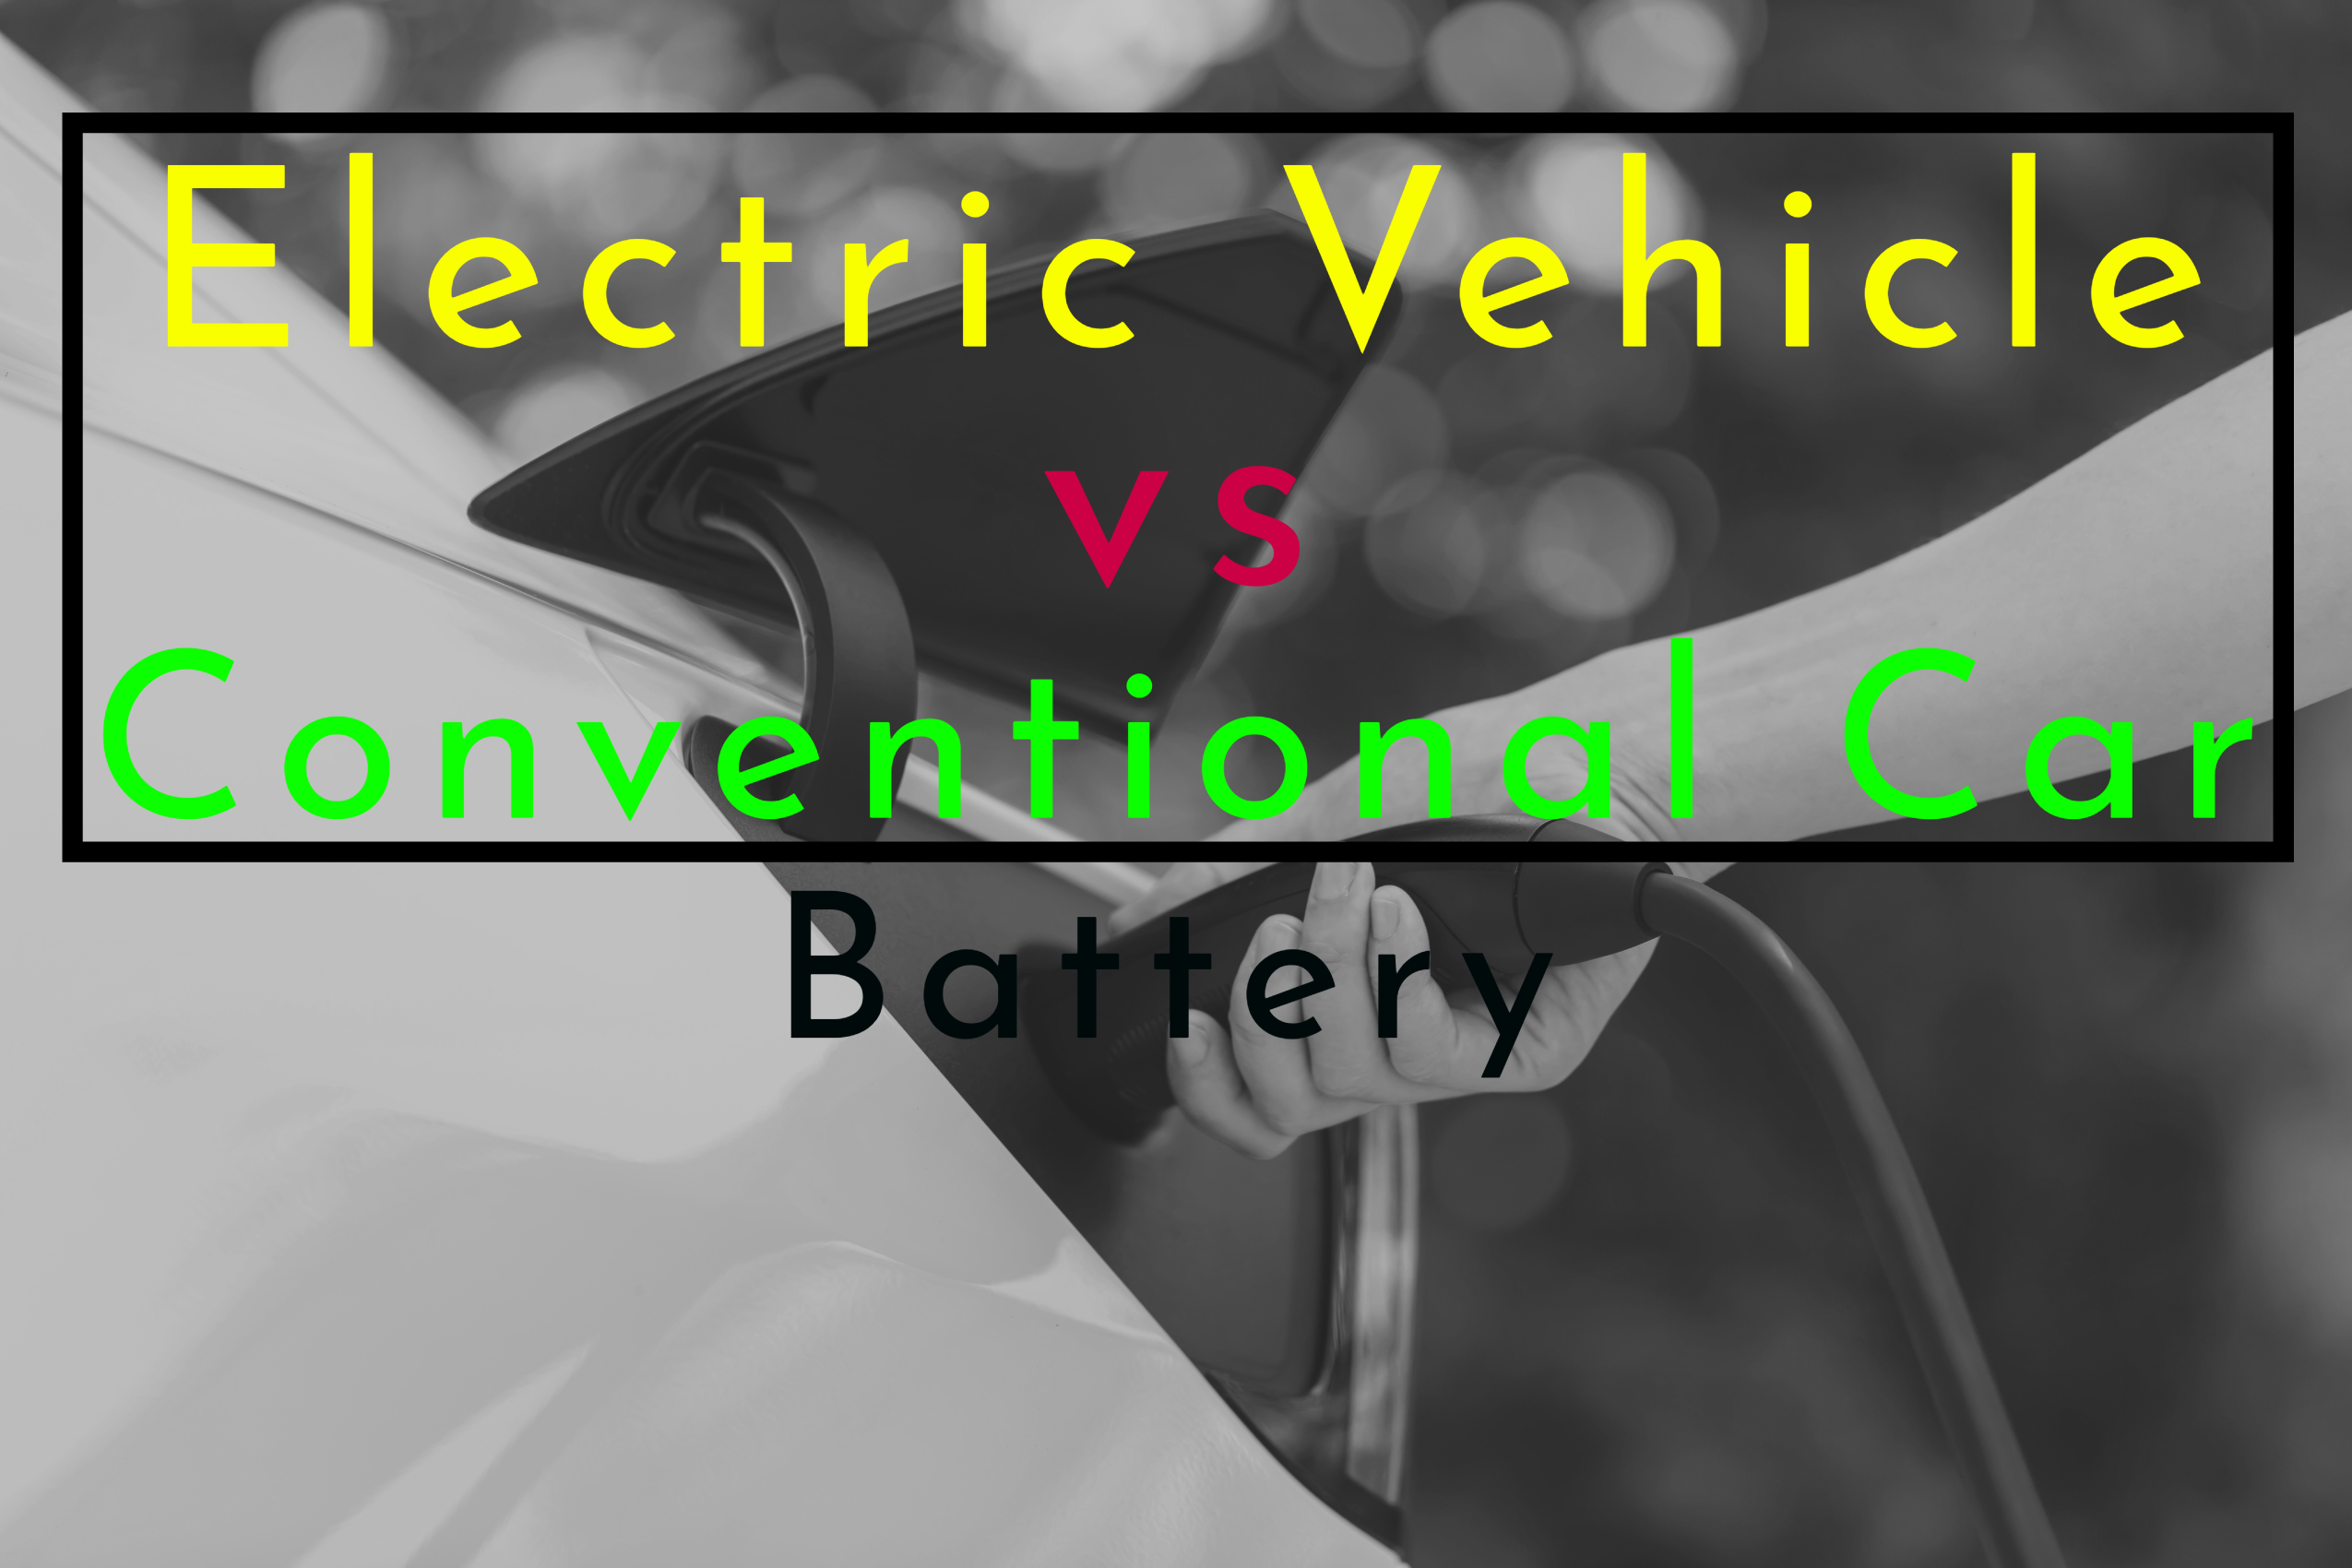 Electrical vehicle vs conventional car battery header featured image